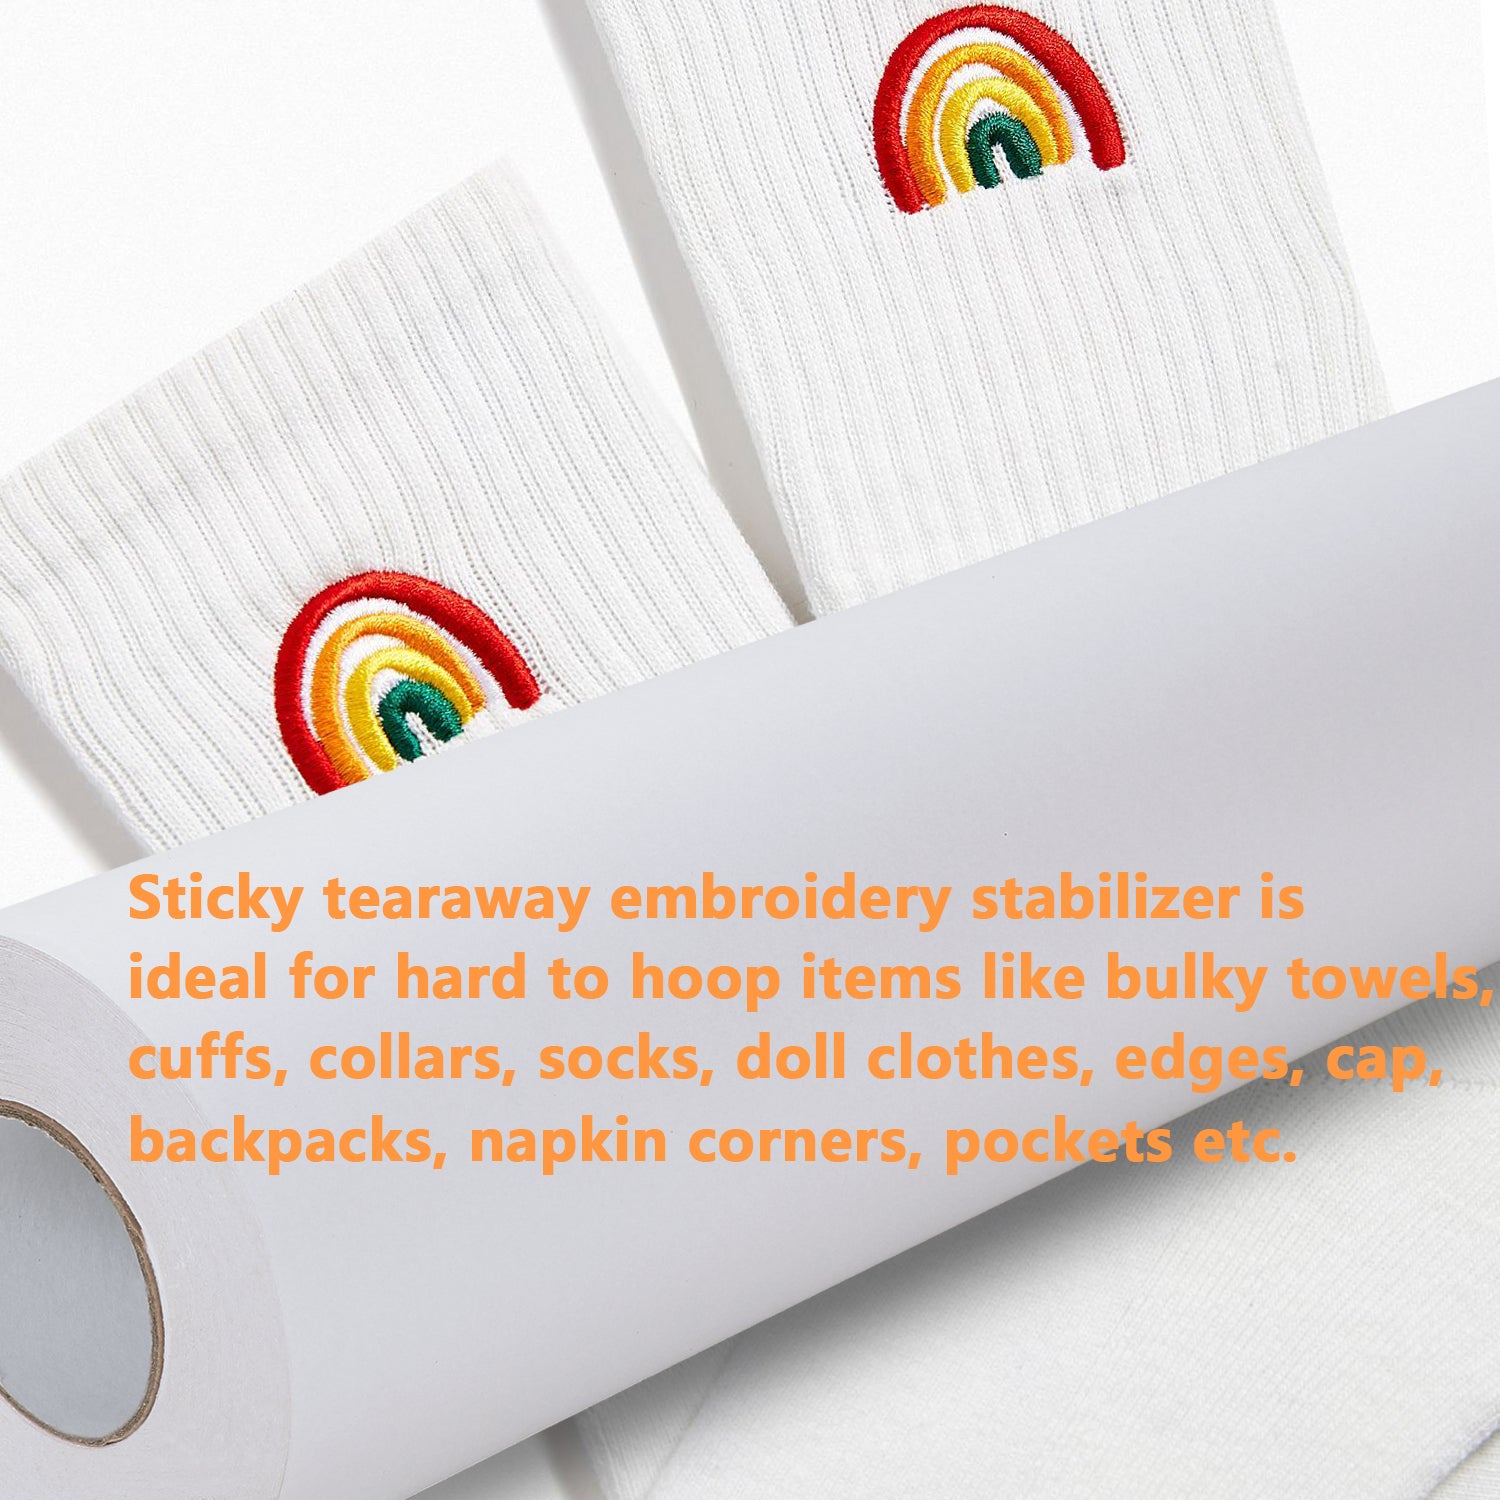 New brothread Sticky Self-Adhesive Tear Away Embroidery Stabilizer Bac